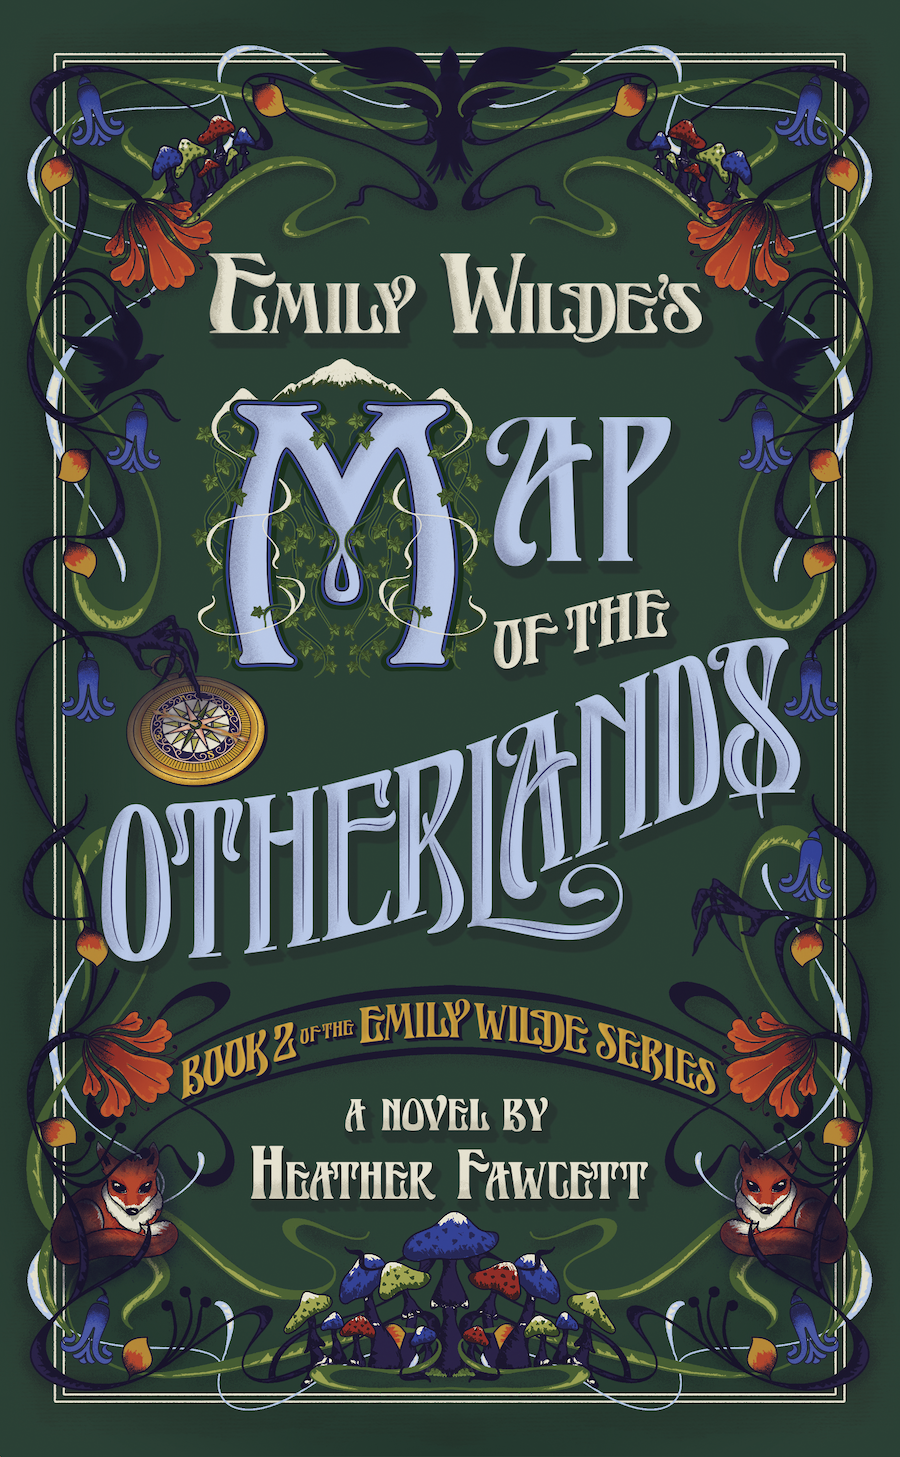 <i>Emily Wilde's Map of the Otherlands</i> by Heather Fawcett